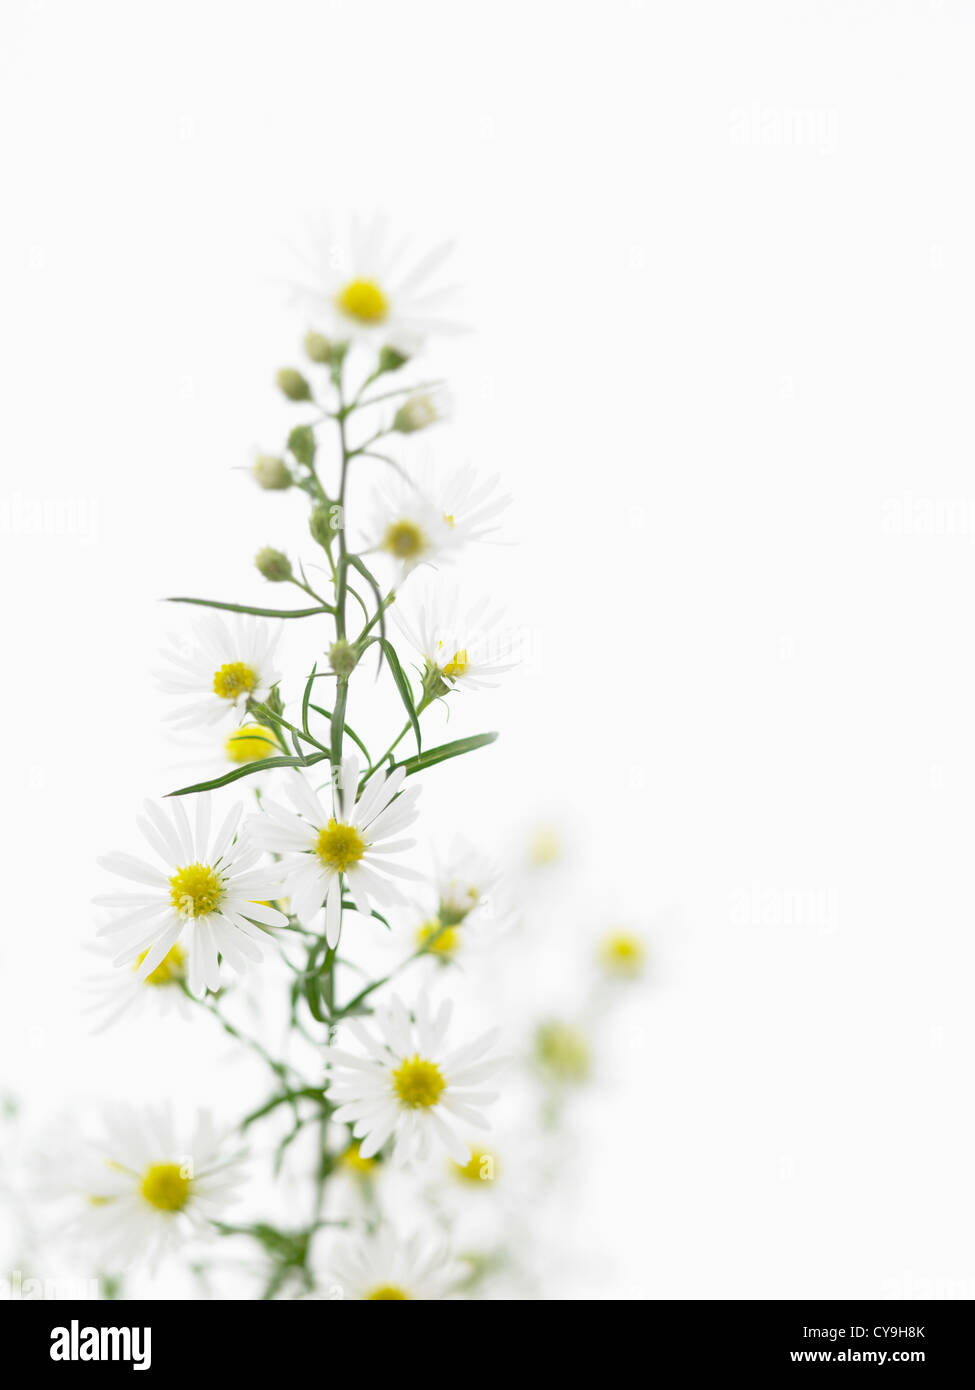 Aster pringlei 'Monte Cassino', White and yellow daisy shaped flowers on a stem in shallow focus against a white background. Stock Photo